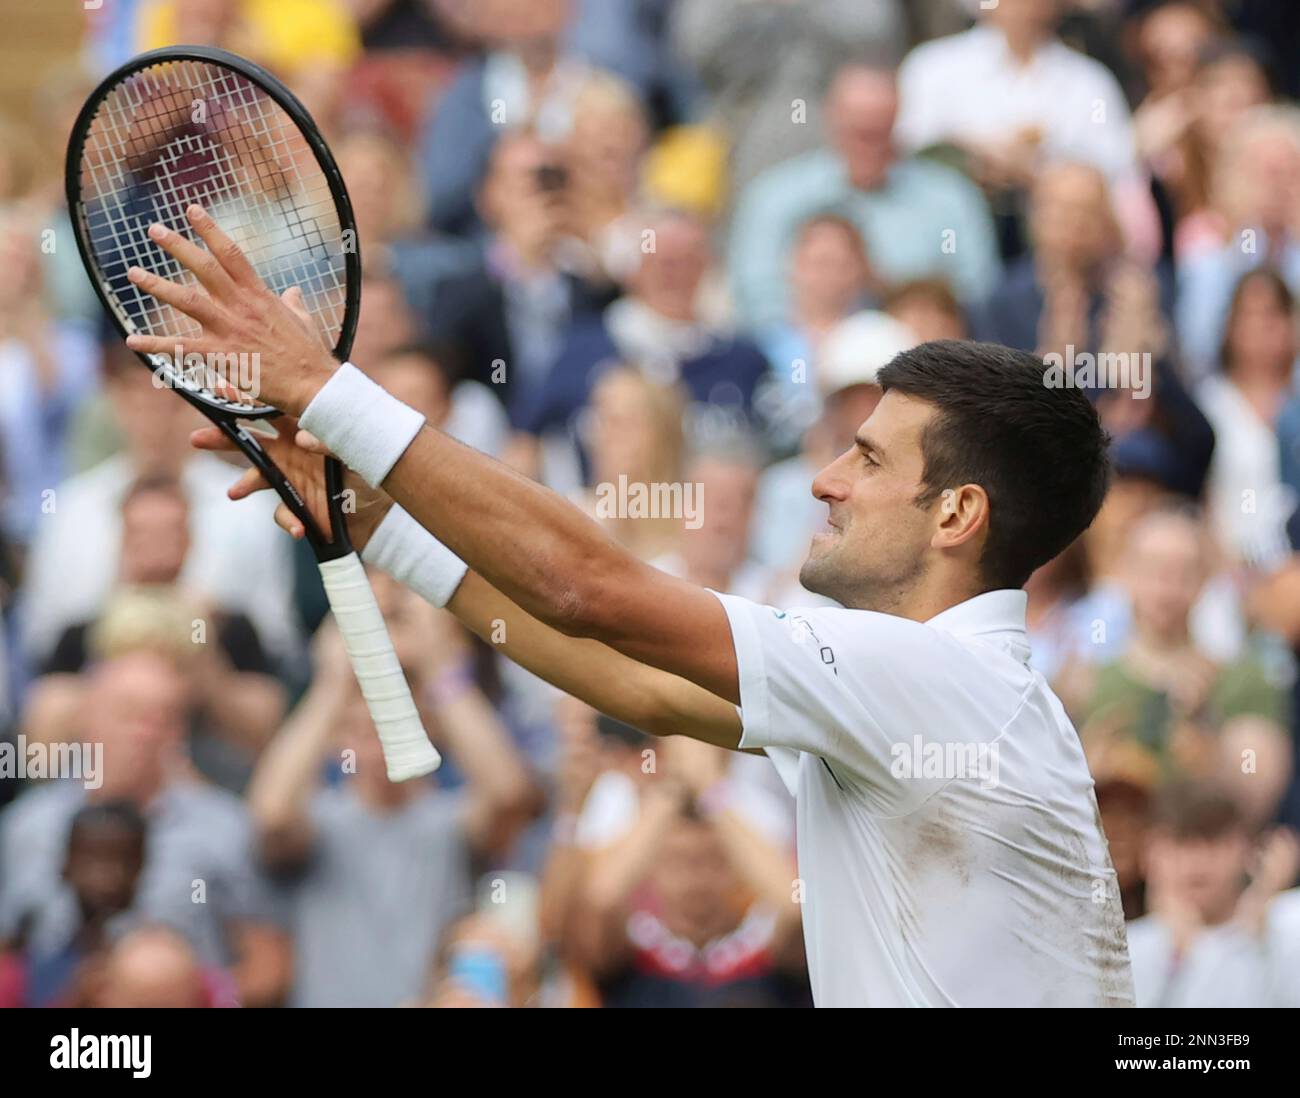 Novak Djokovic of Serbia reacts after winning the mens singles semifinal of the Championships, Wimbledon against Denis Shapovalov of Canada at the All England Lawn Tennis and Croquet Club in London, United